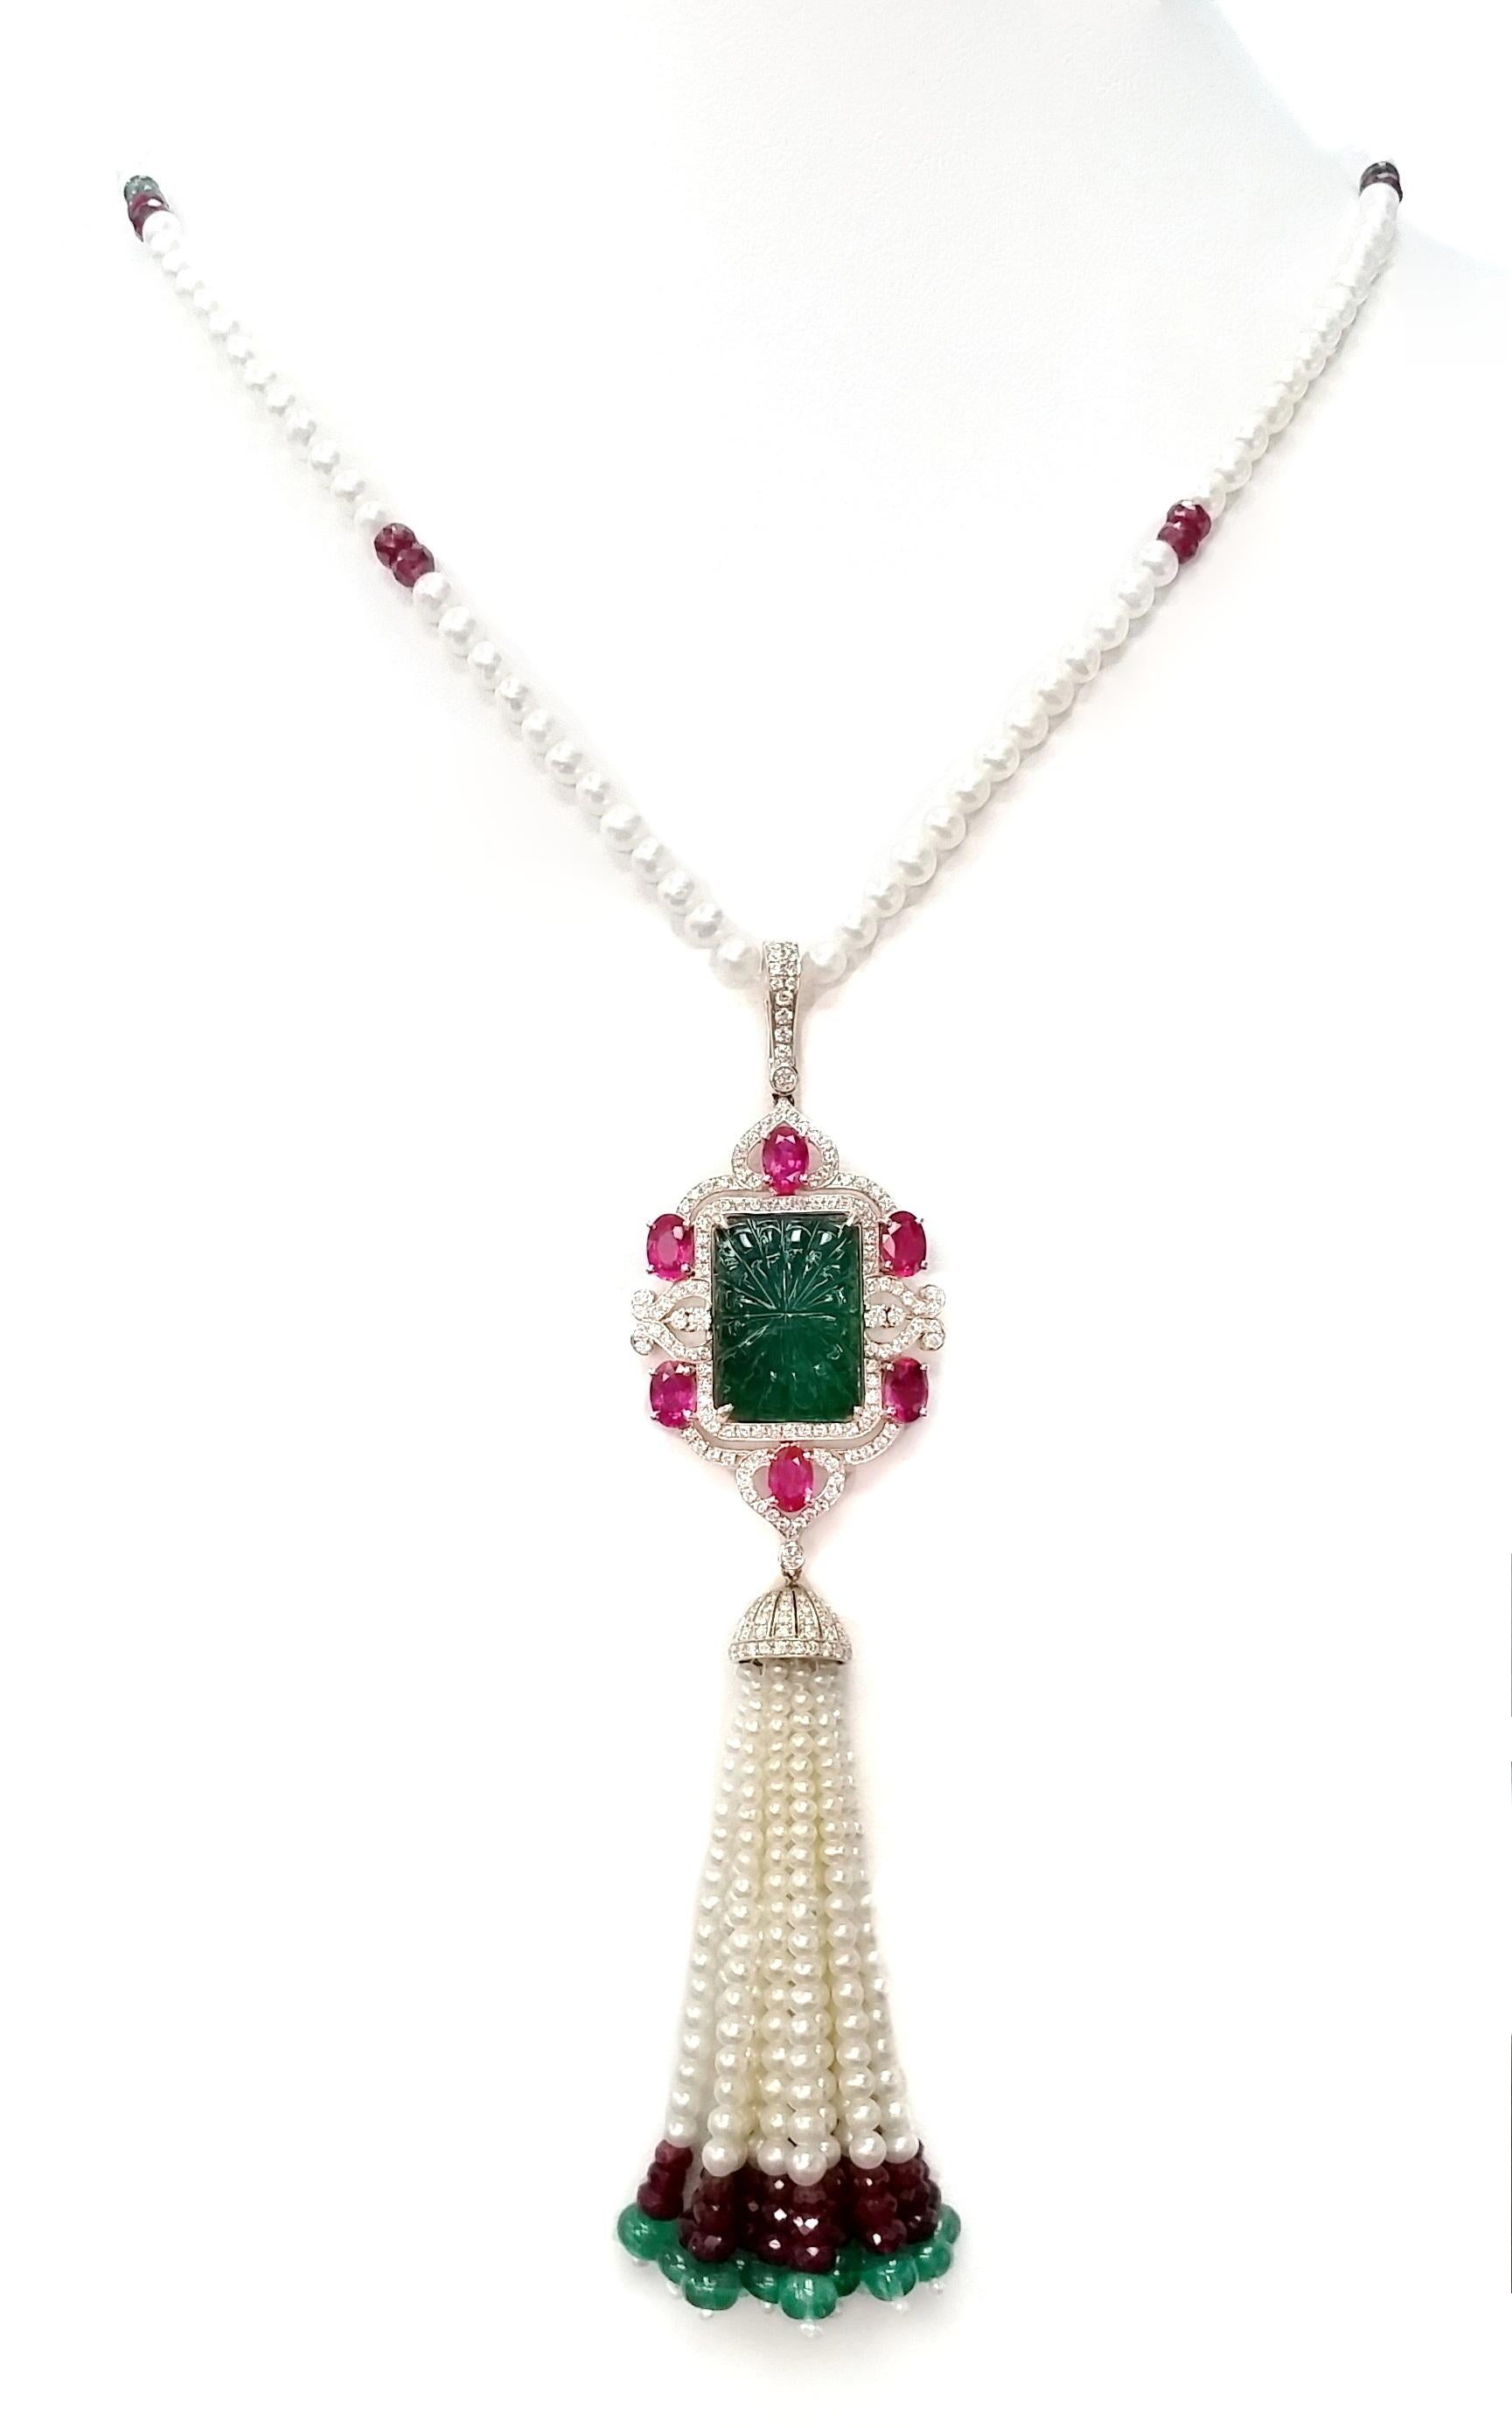 Women's IGI Certified 30.86ct Emerald 23.65 Rubies 1.52ct Diamonds and Pearls Necklace For Sale